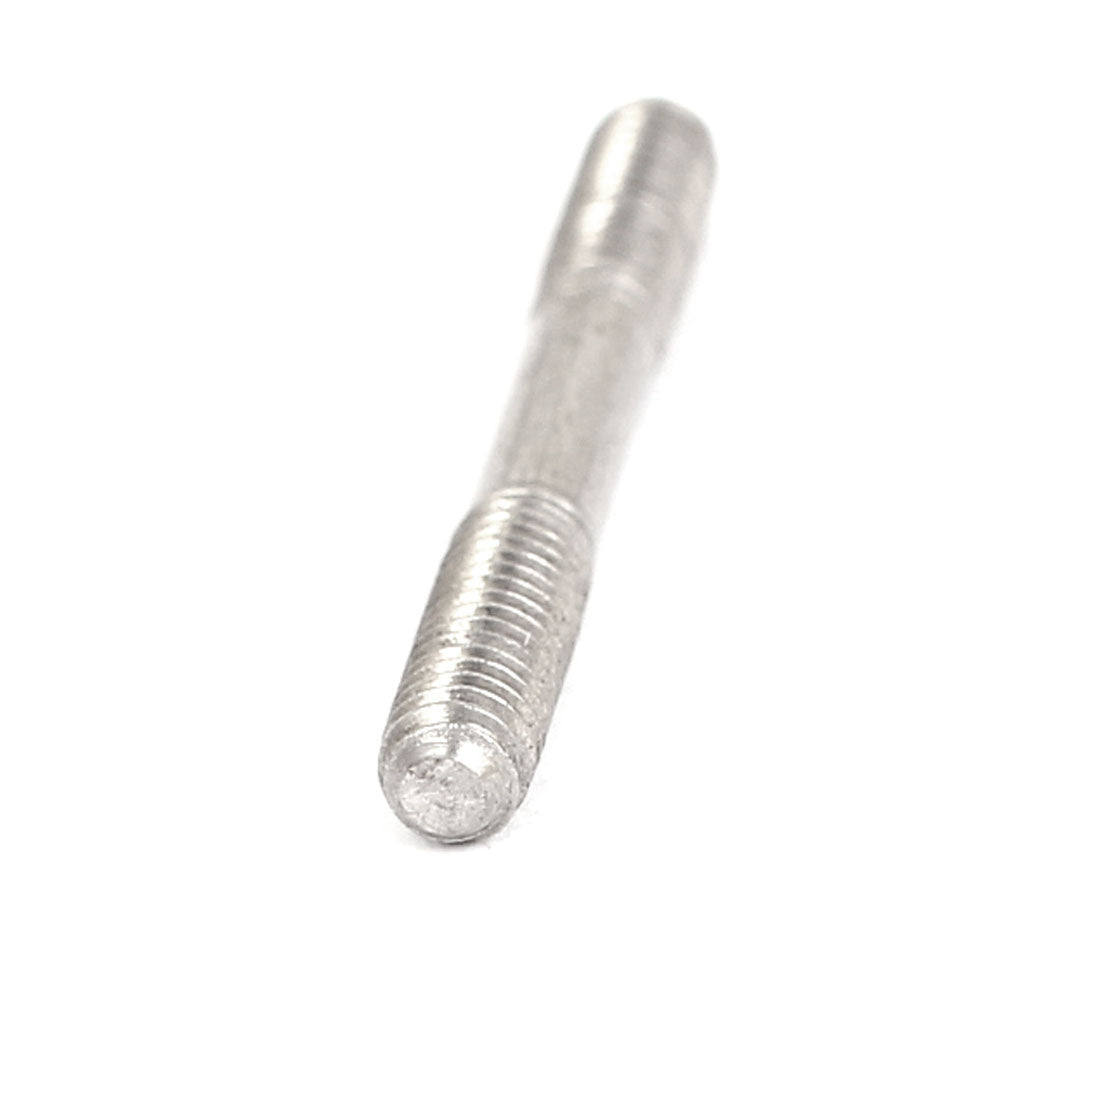 uxcell Uxcell M4x35mm Stainless Steel Double End Threaded Stud Screw Bolt Silver Tone 5Pcs